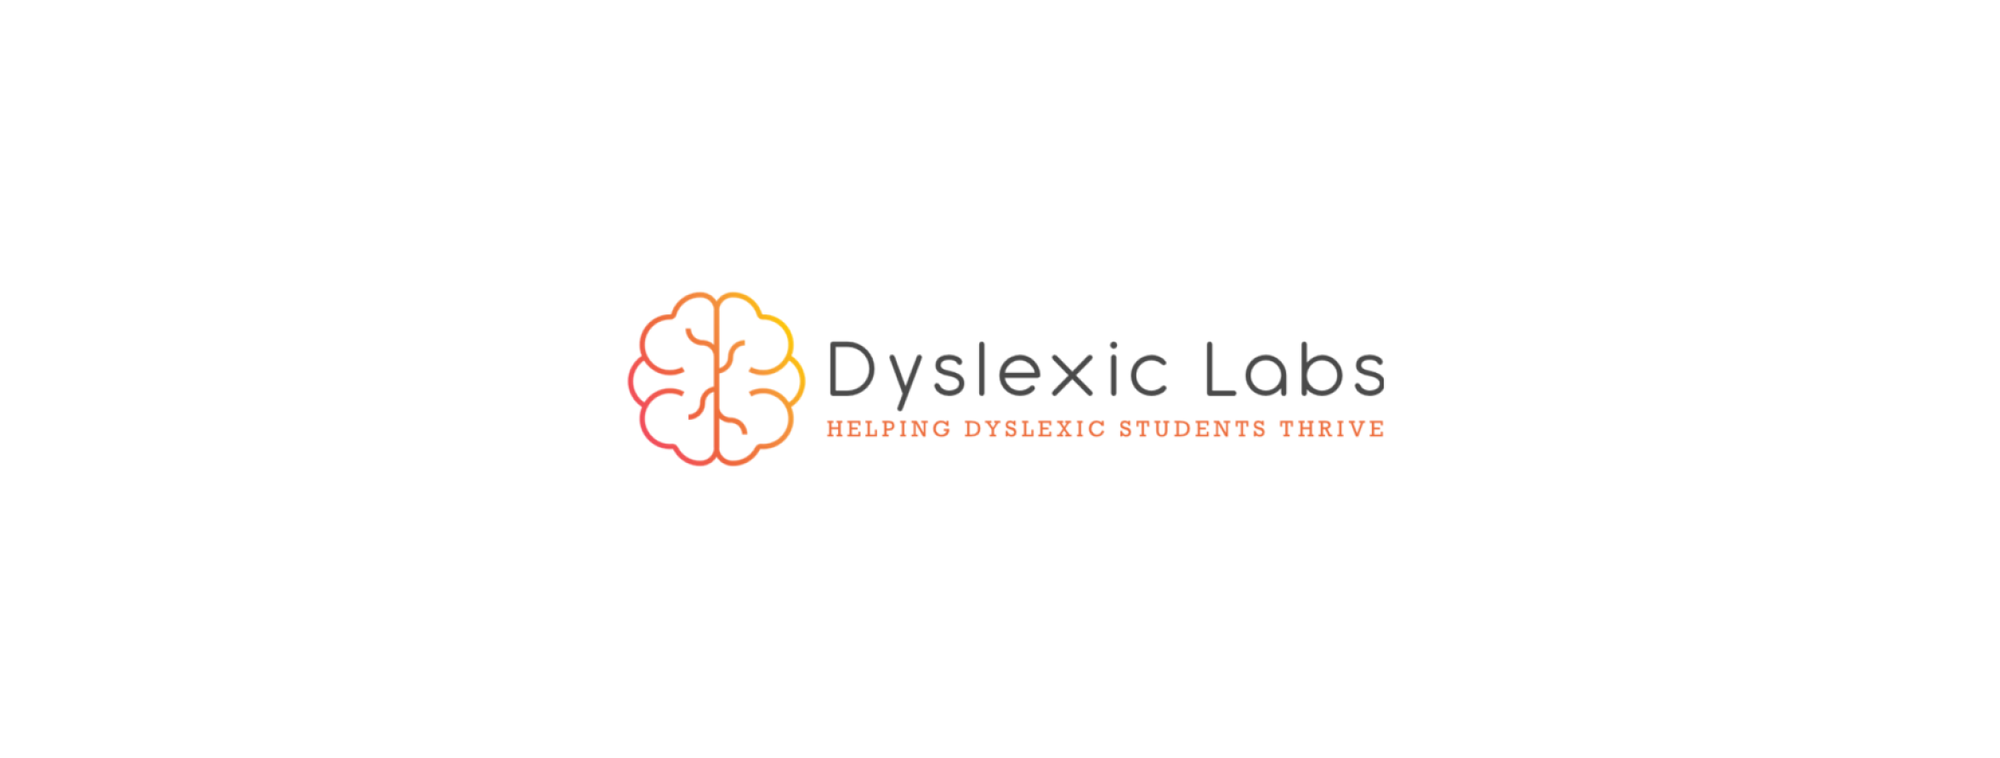 Sharing My Dyslexia Experiences With You - Dyslexic Labs